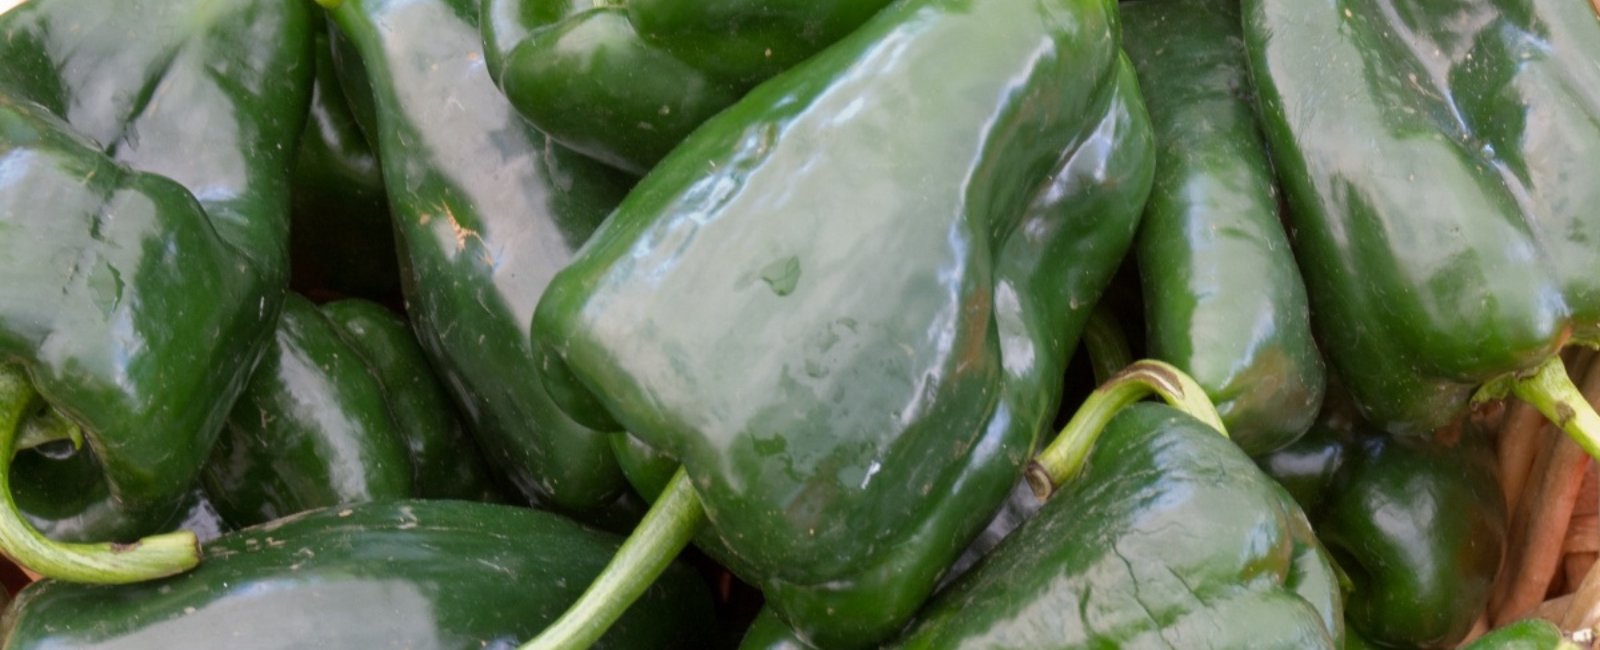 DISCOVER THE 5 MAIN BENEFITS OF POBLANO PEPPER